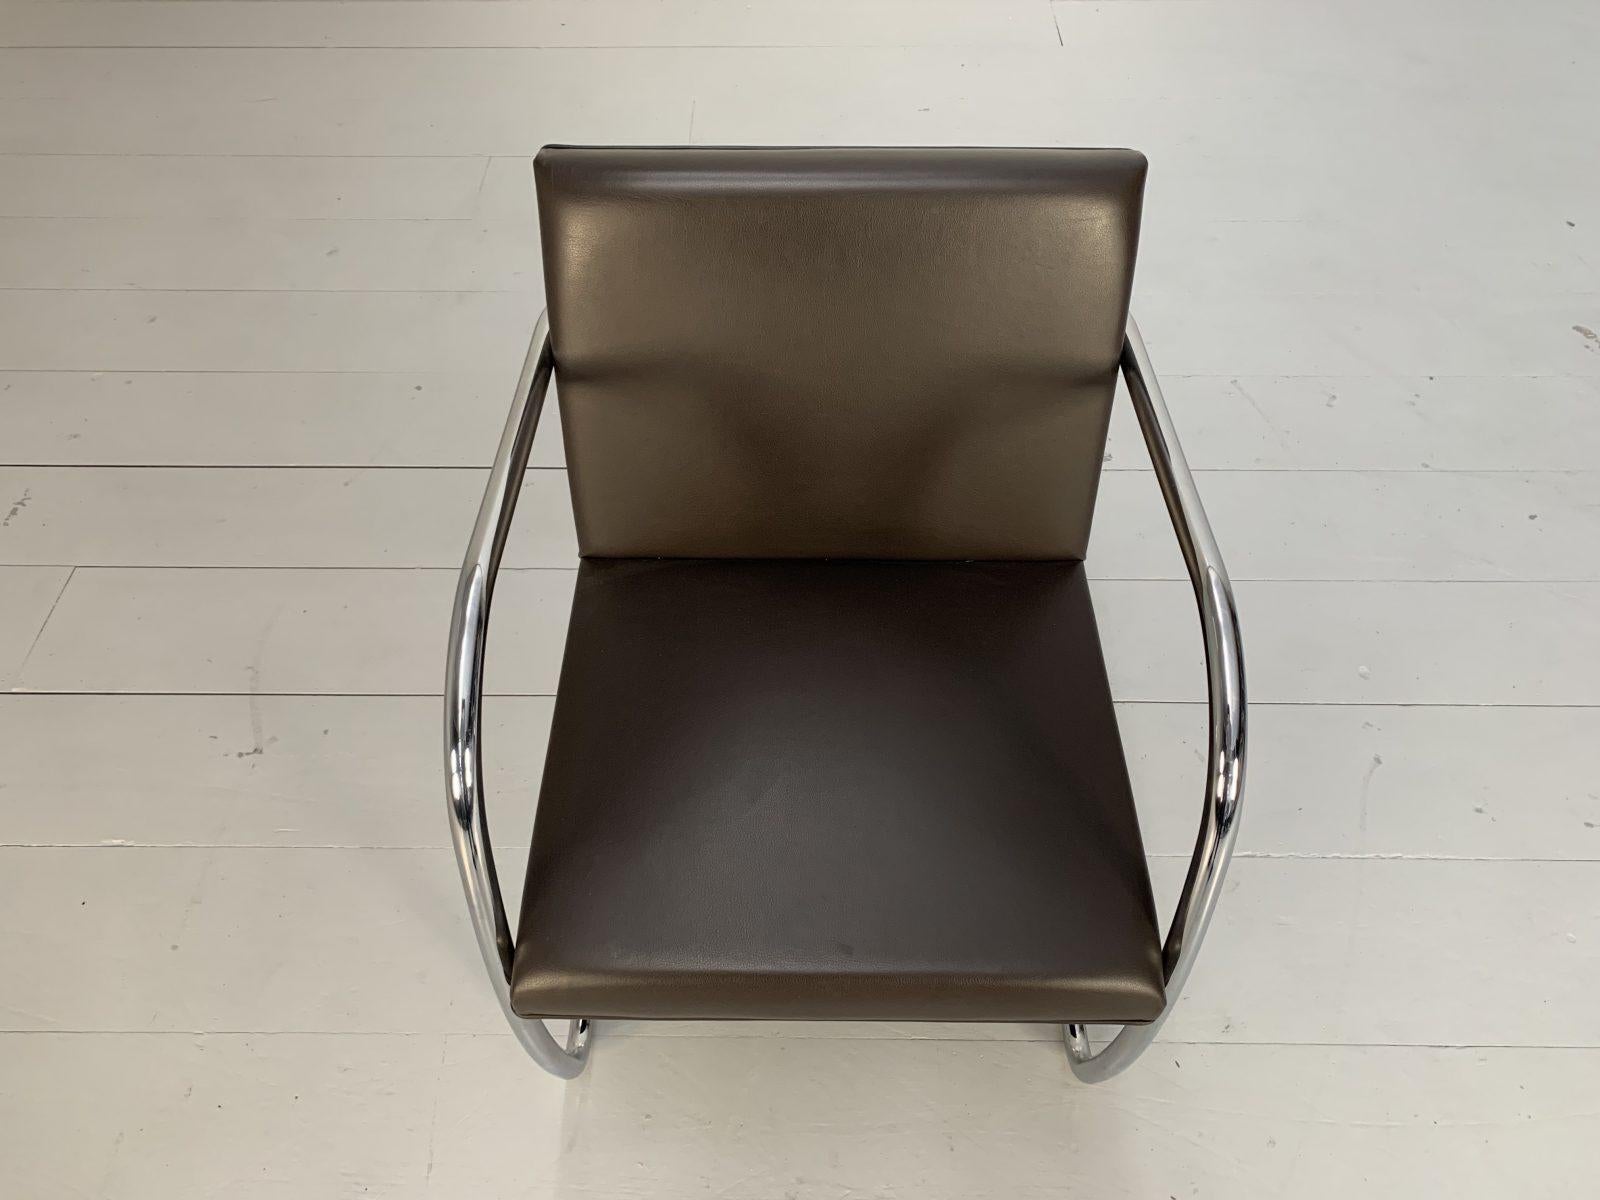 Pair of Knoll Studio “Brno Tubular” Lounge Chair Armchairs in Dark Brown Leather For Sale 5